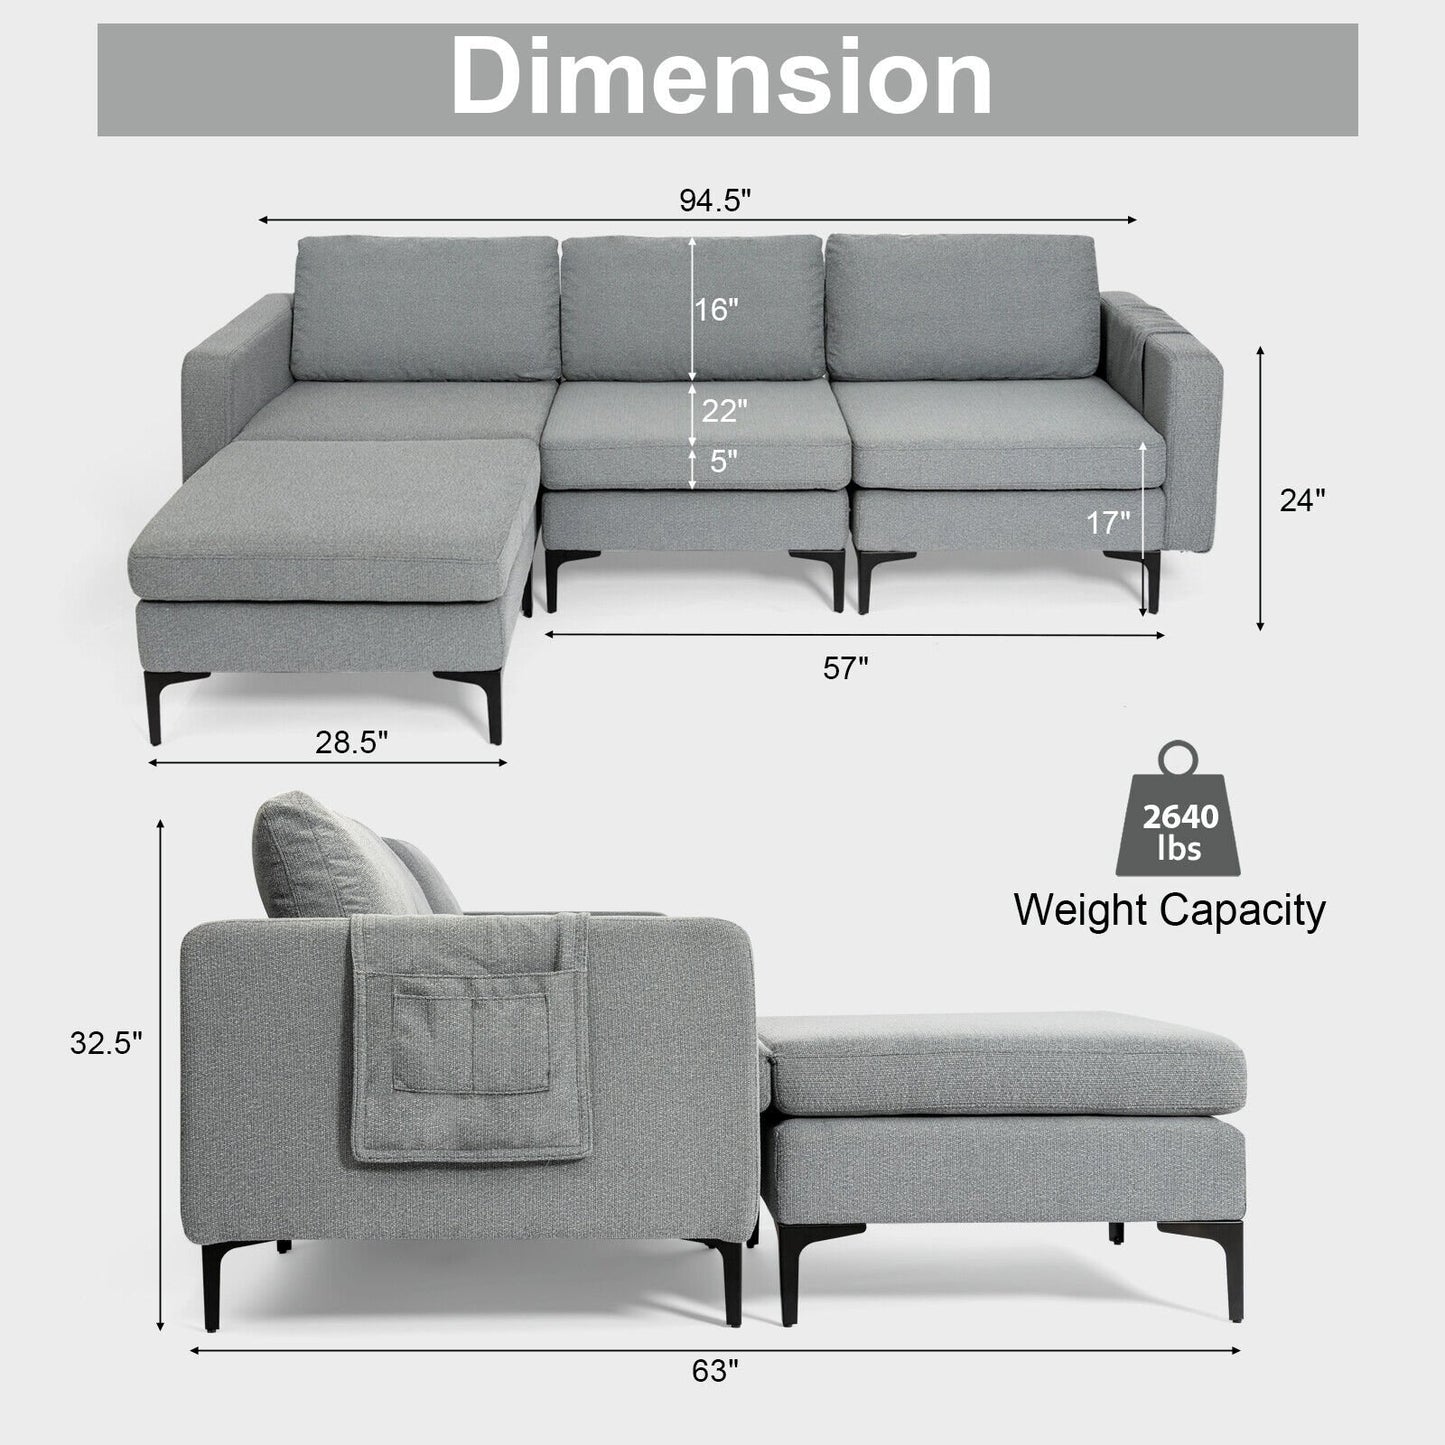 Modular L-shaped Sectional Sofa with Reversible Chaise and 2 USB Ports, Dark Gray